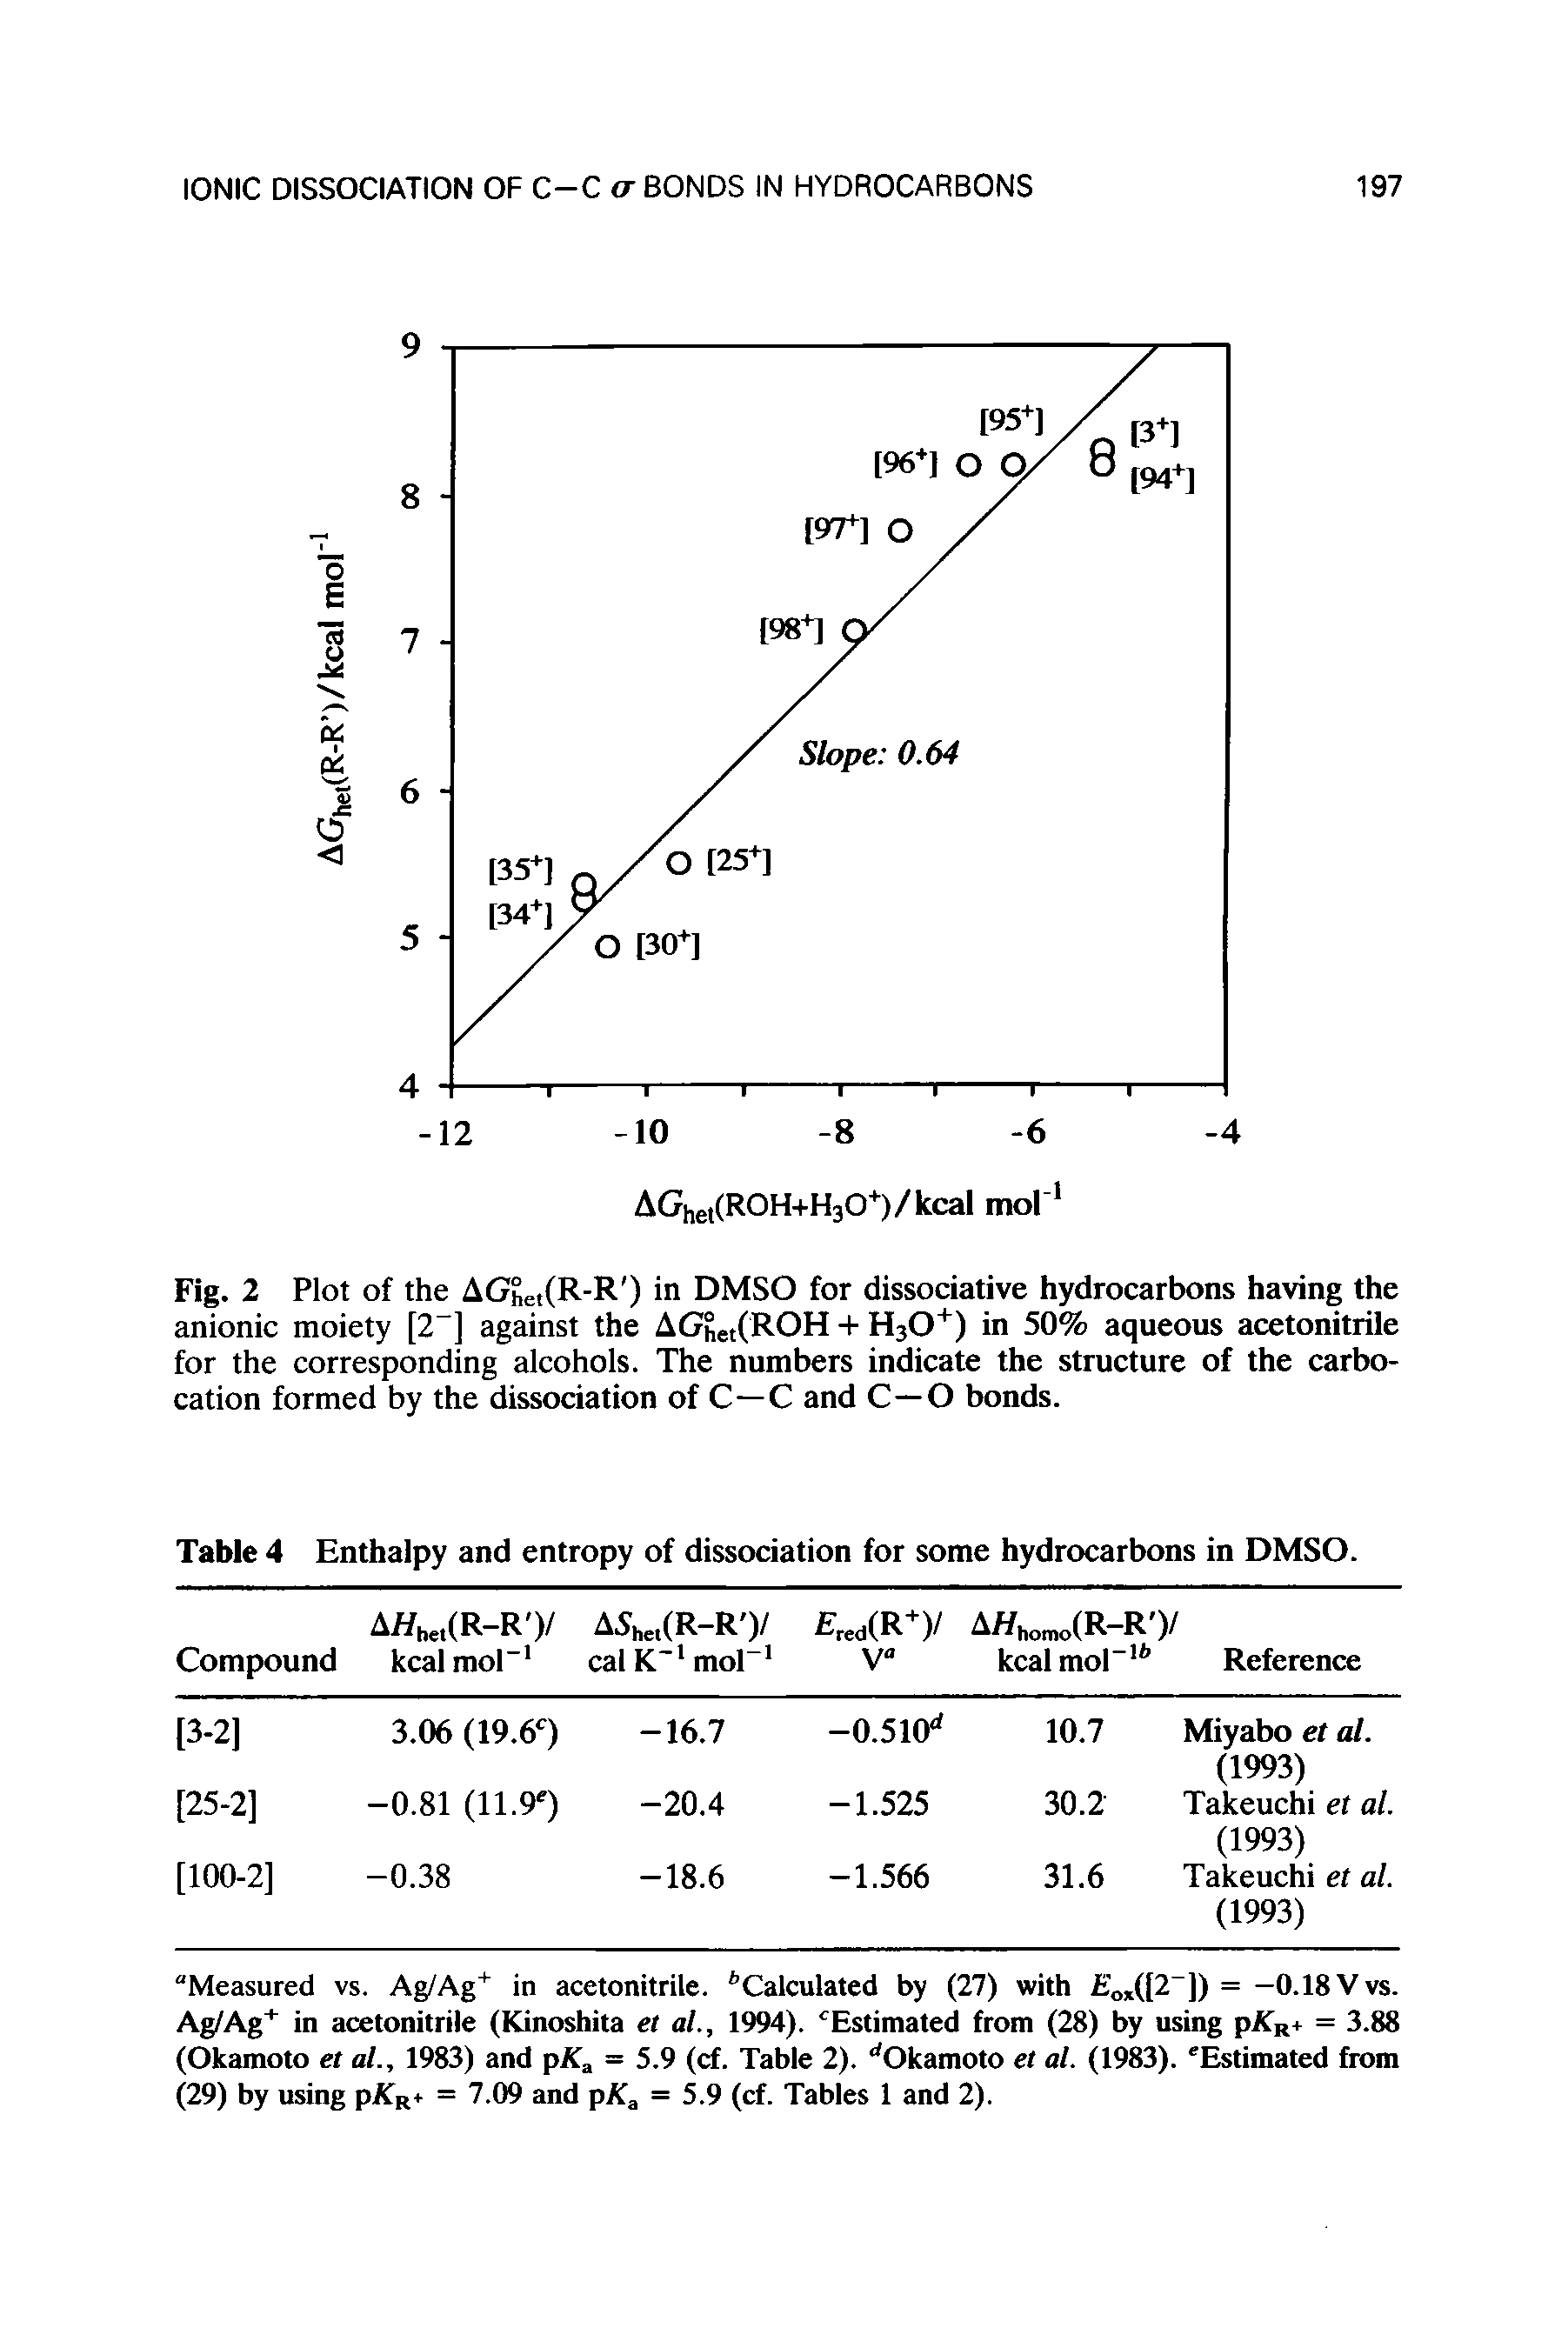 Table 4 Enthalpy and entropy of dissociation for some hydrocarbons in DMSO.